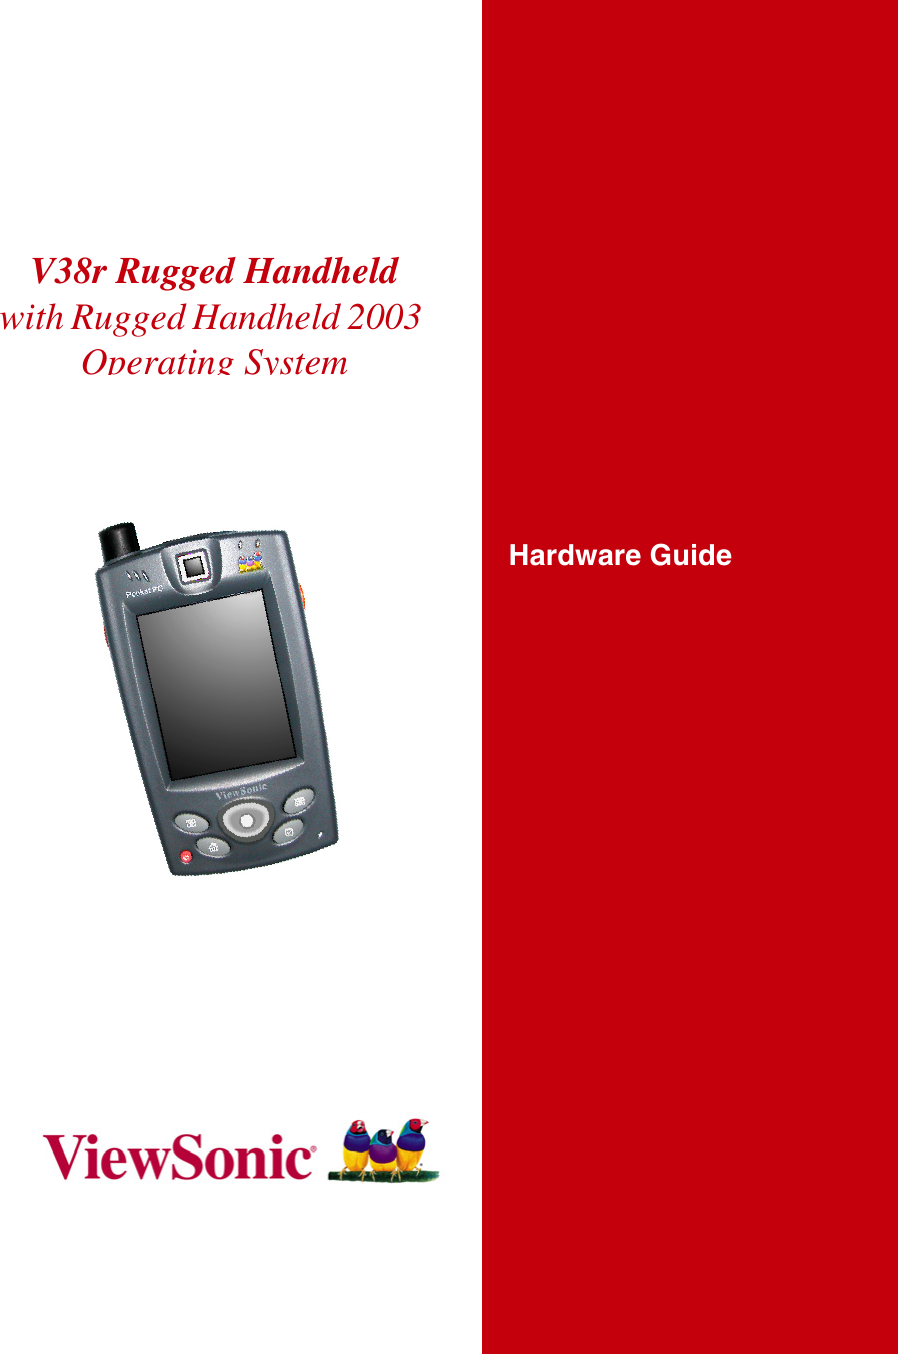 Hardware GuideV38r Rugged Handheld with Rugged Handheld 2003 Operating System